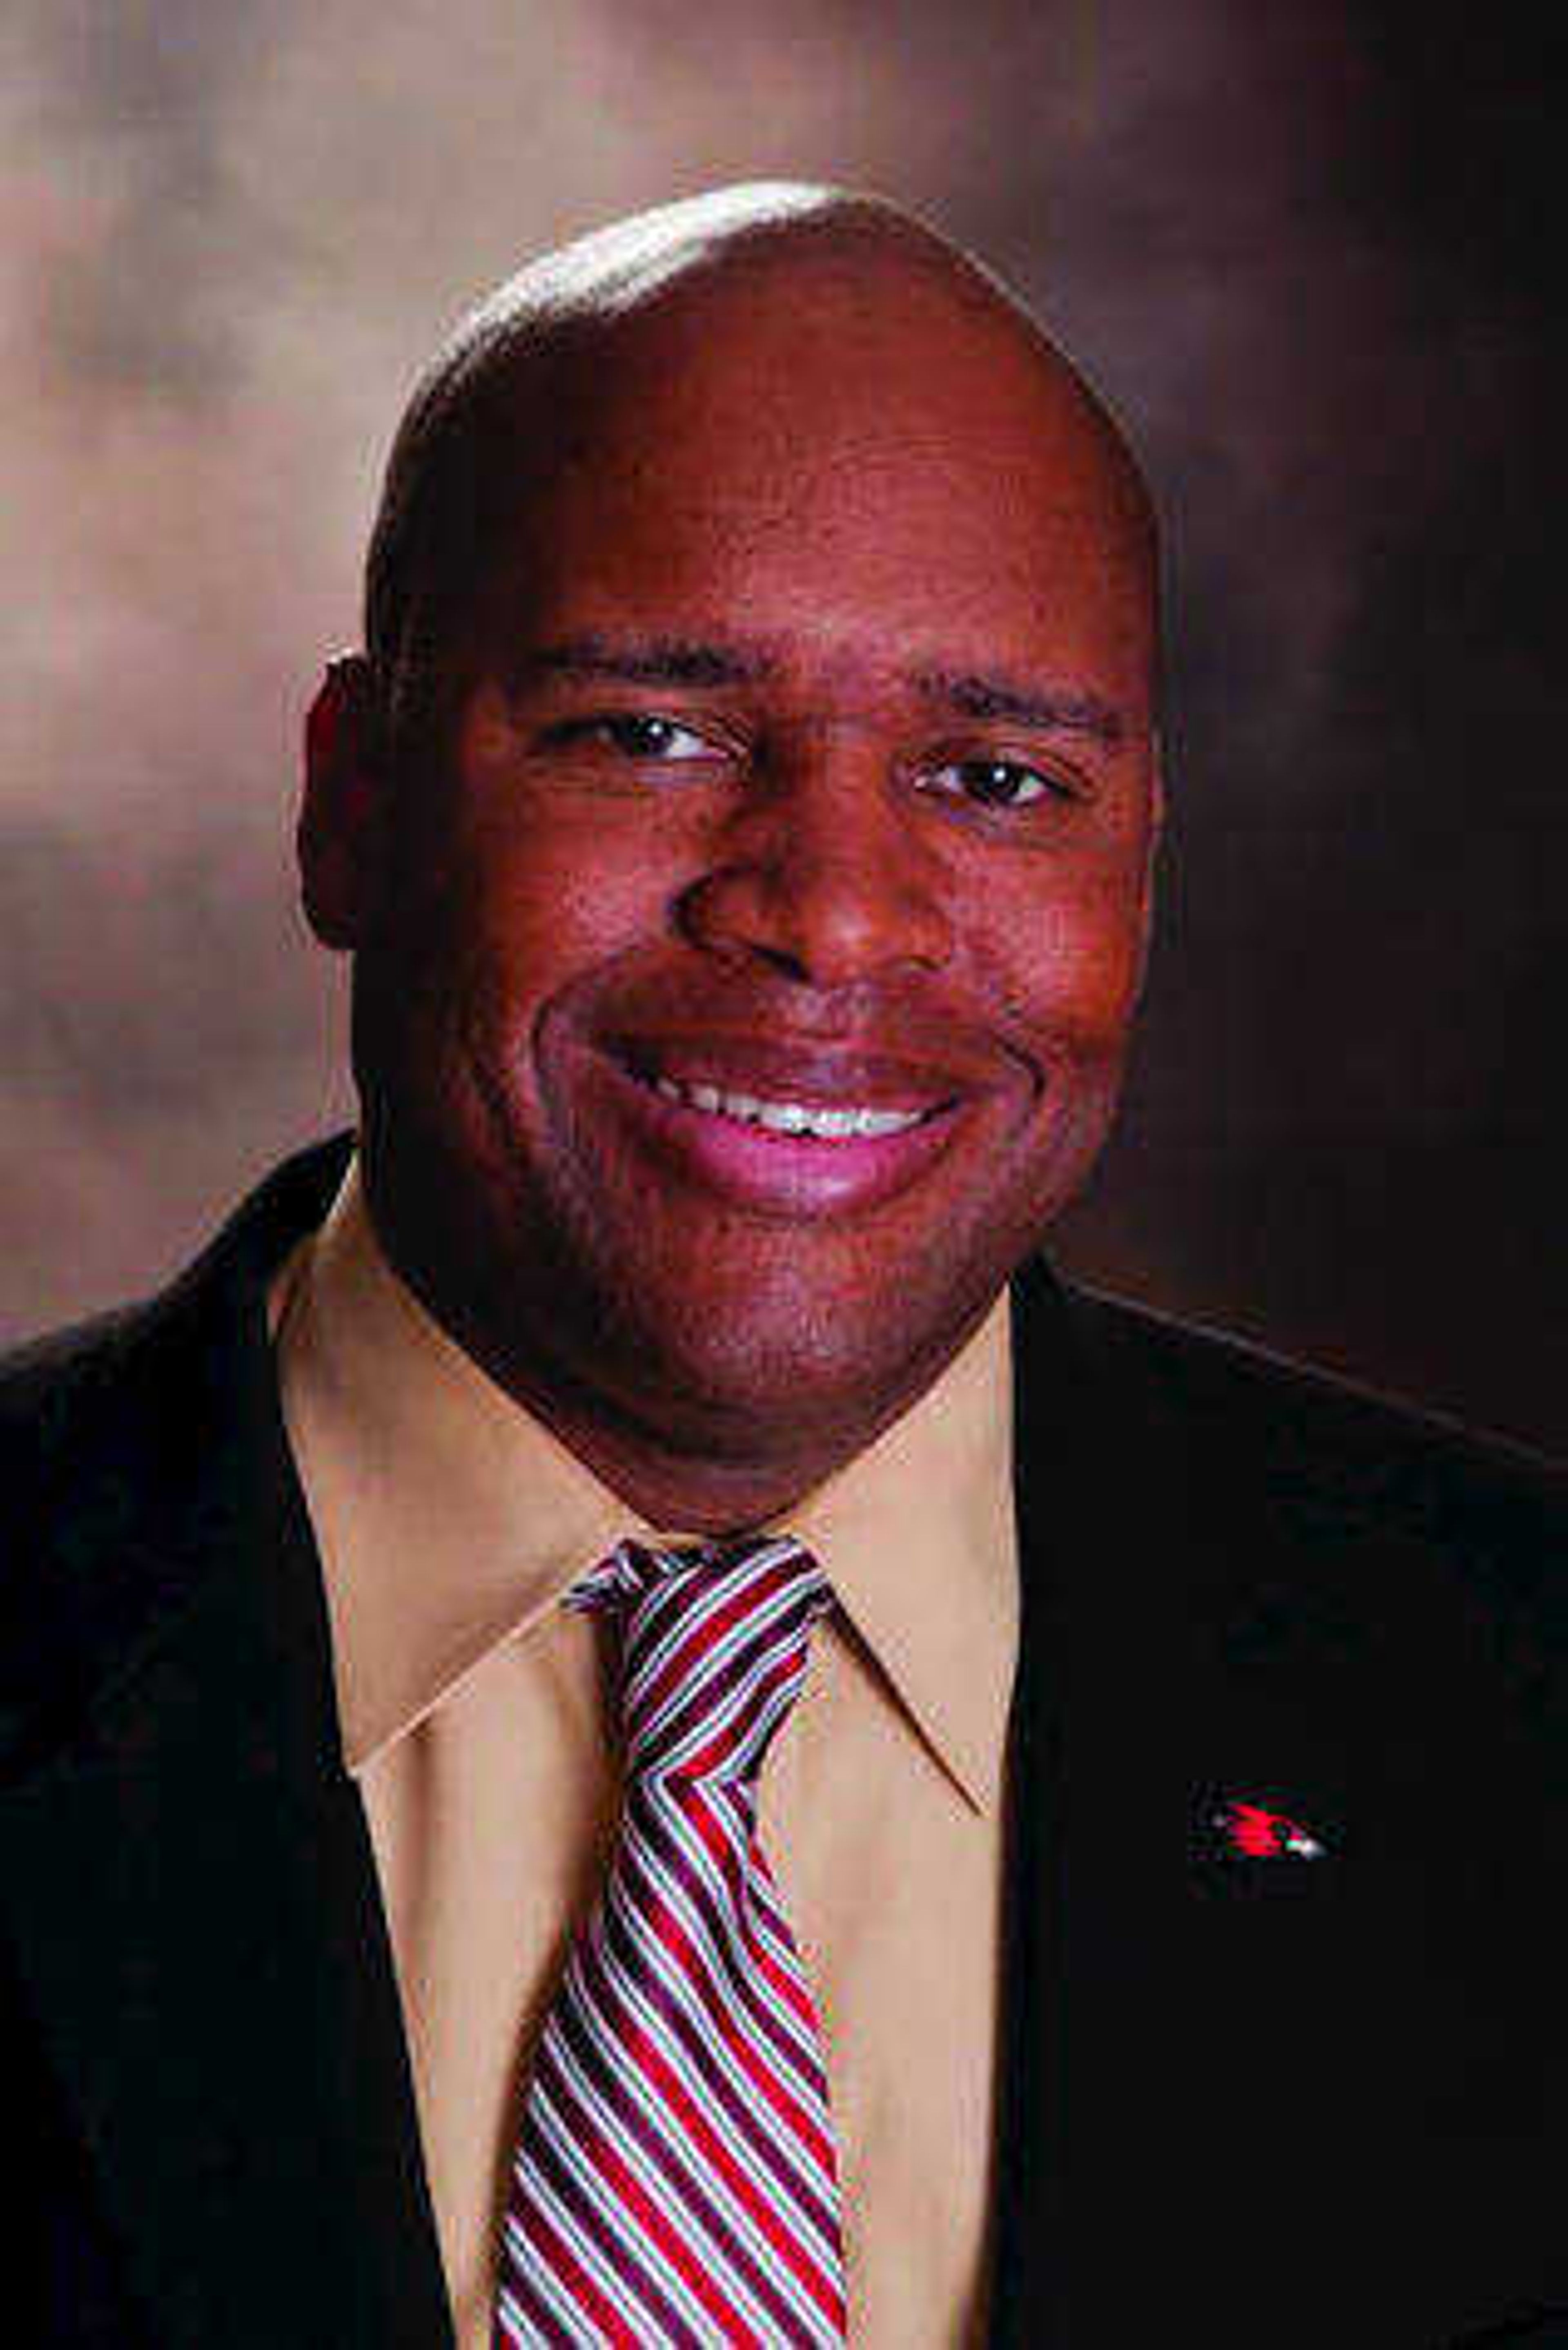 Mark Alnutt has been the athletic director for Southeast Missouri State University since 2012. Submitted photo